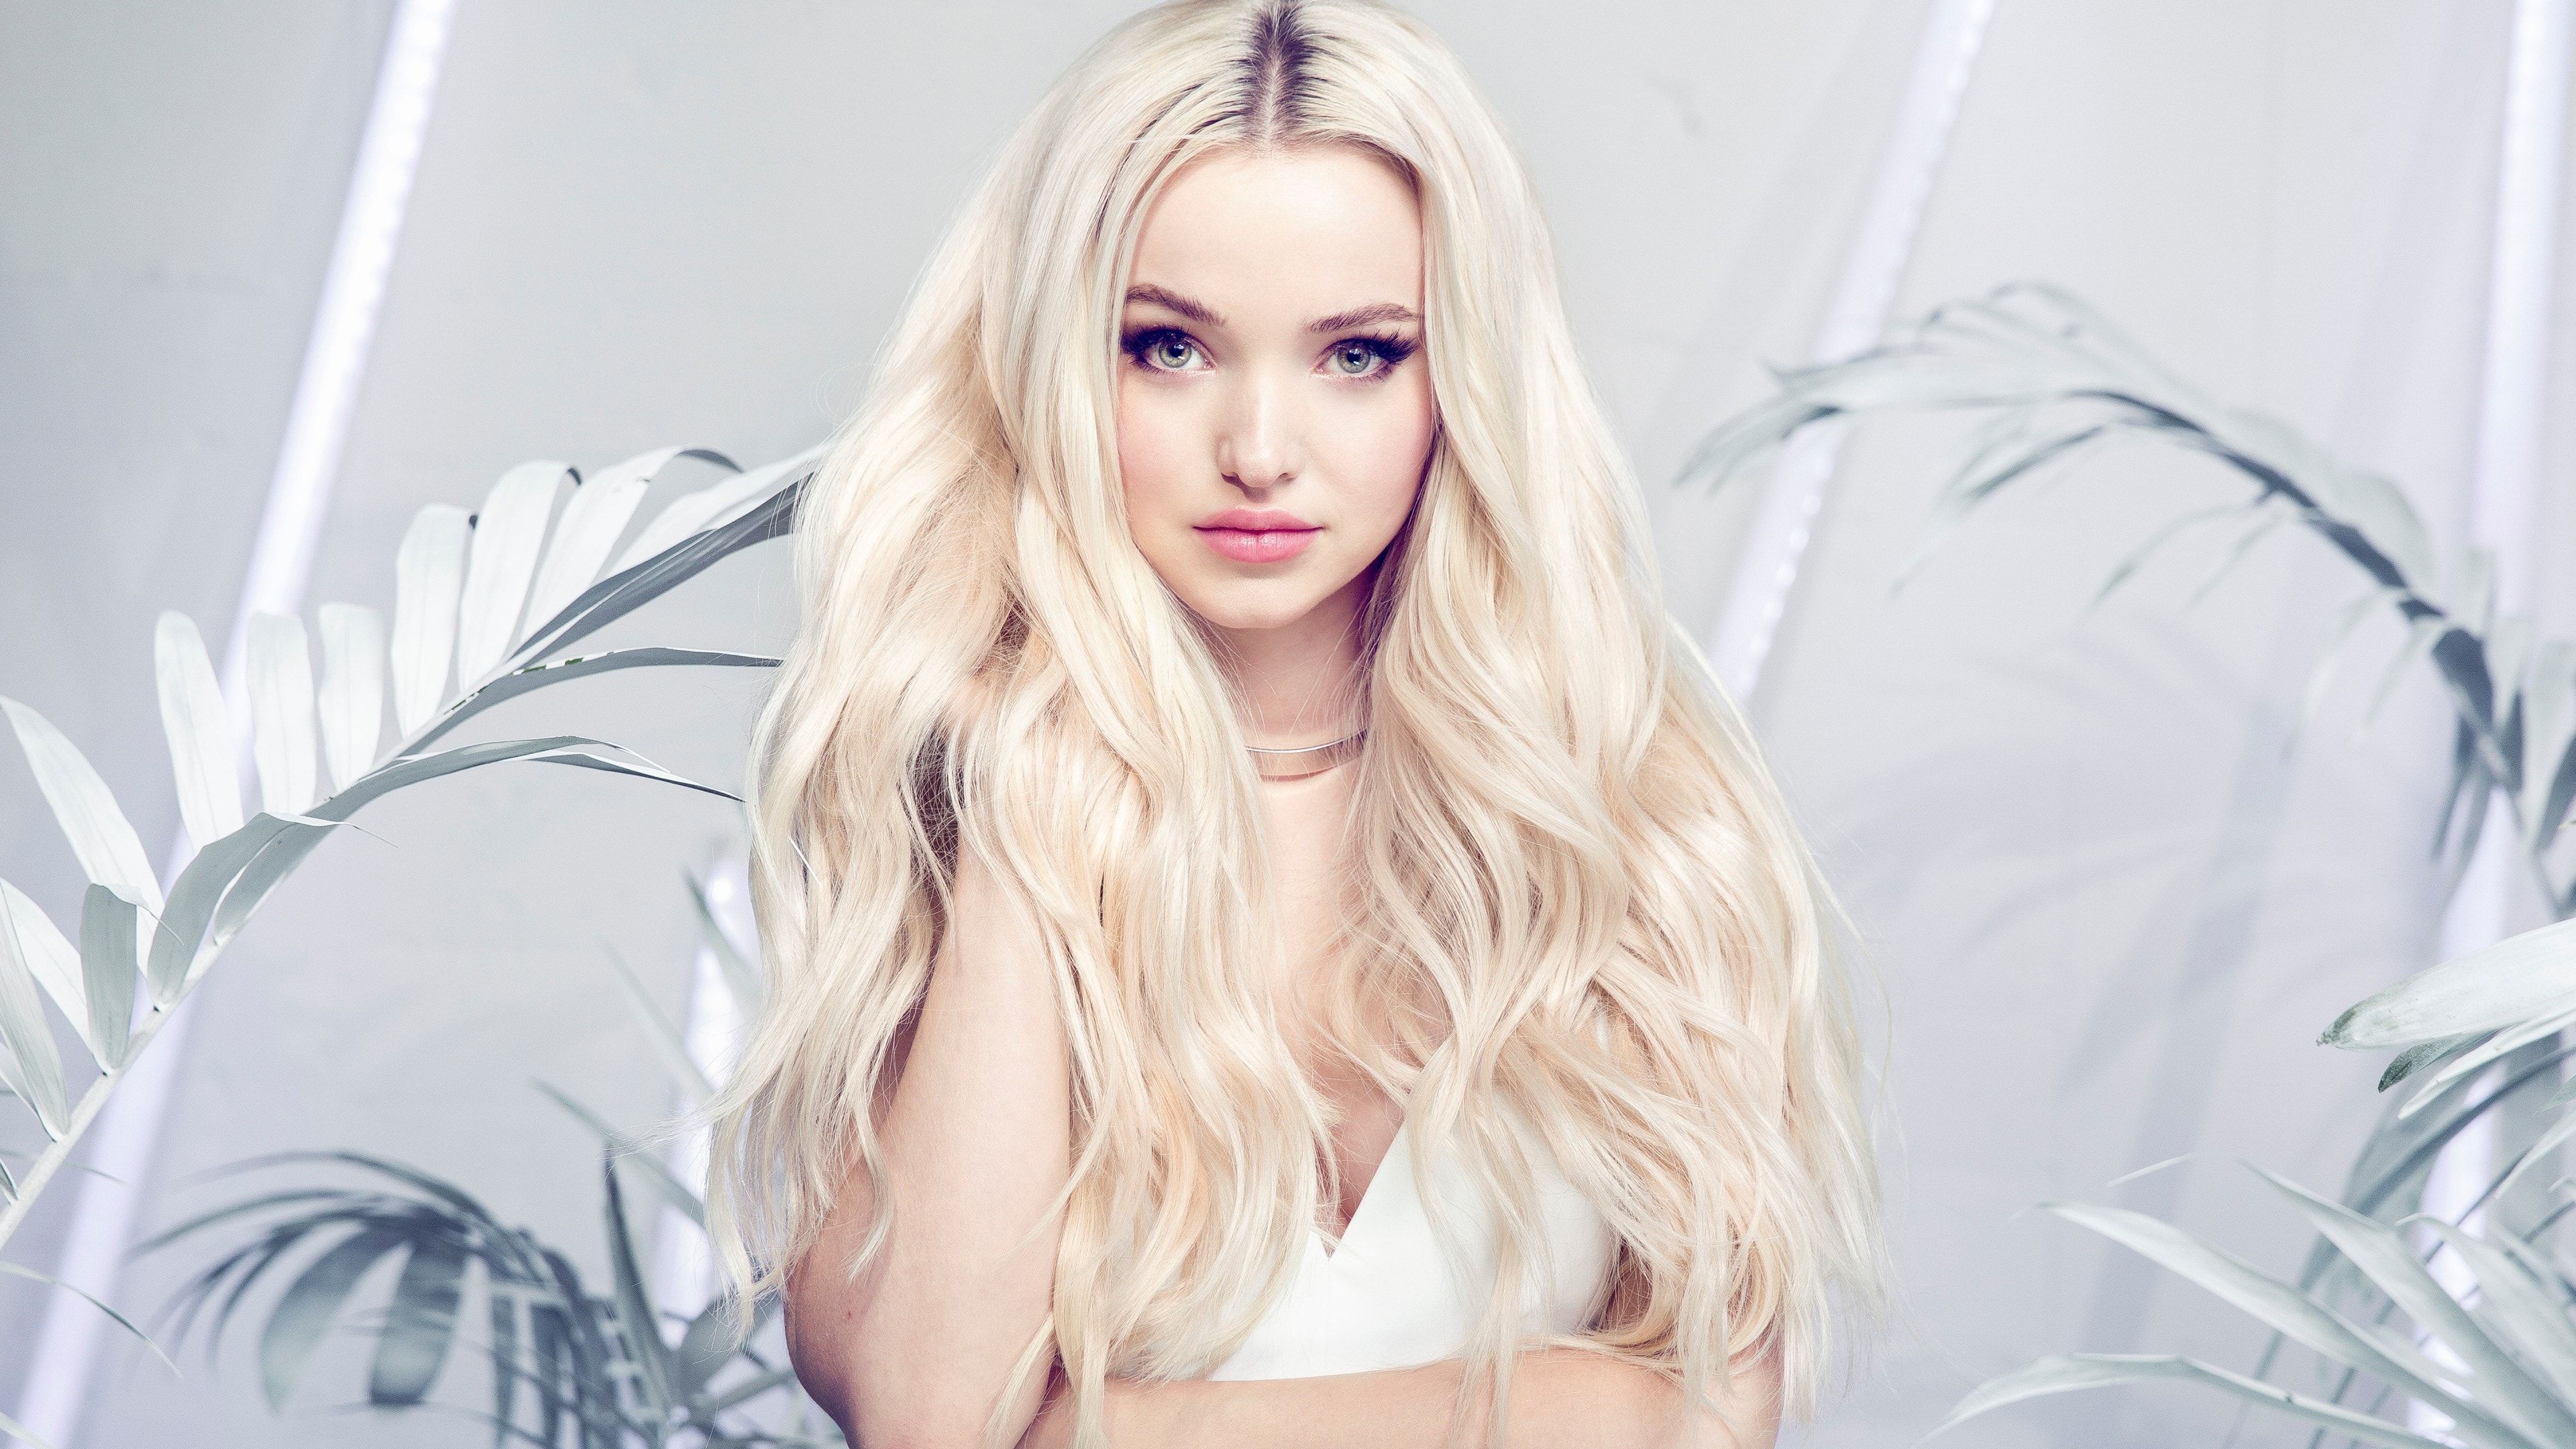 Hot Dove Cameron At Event Wallpapers